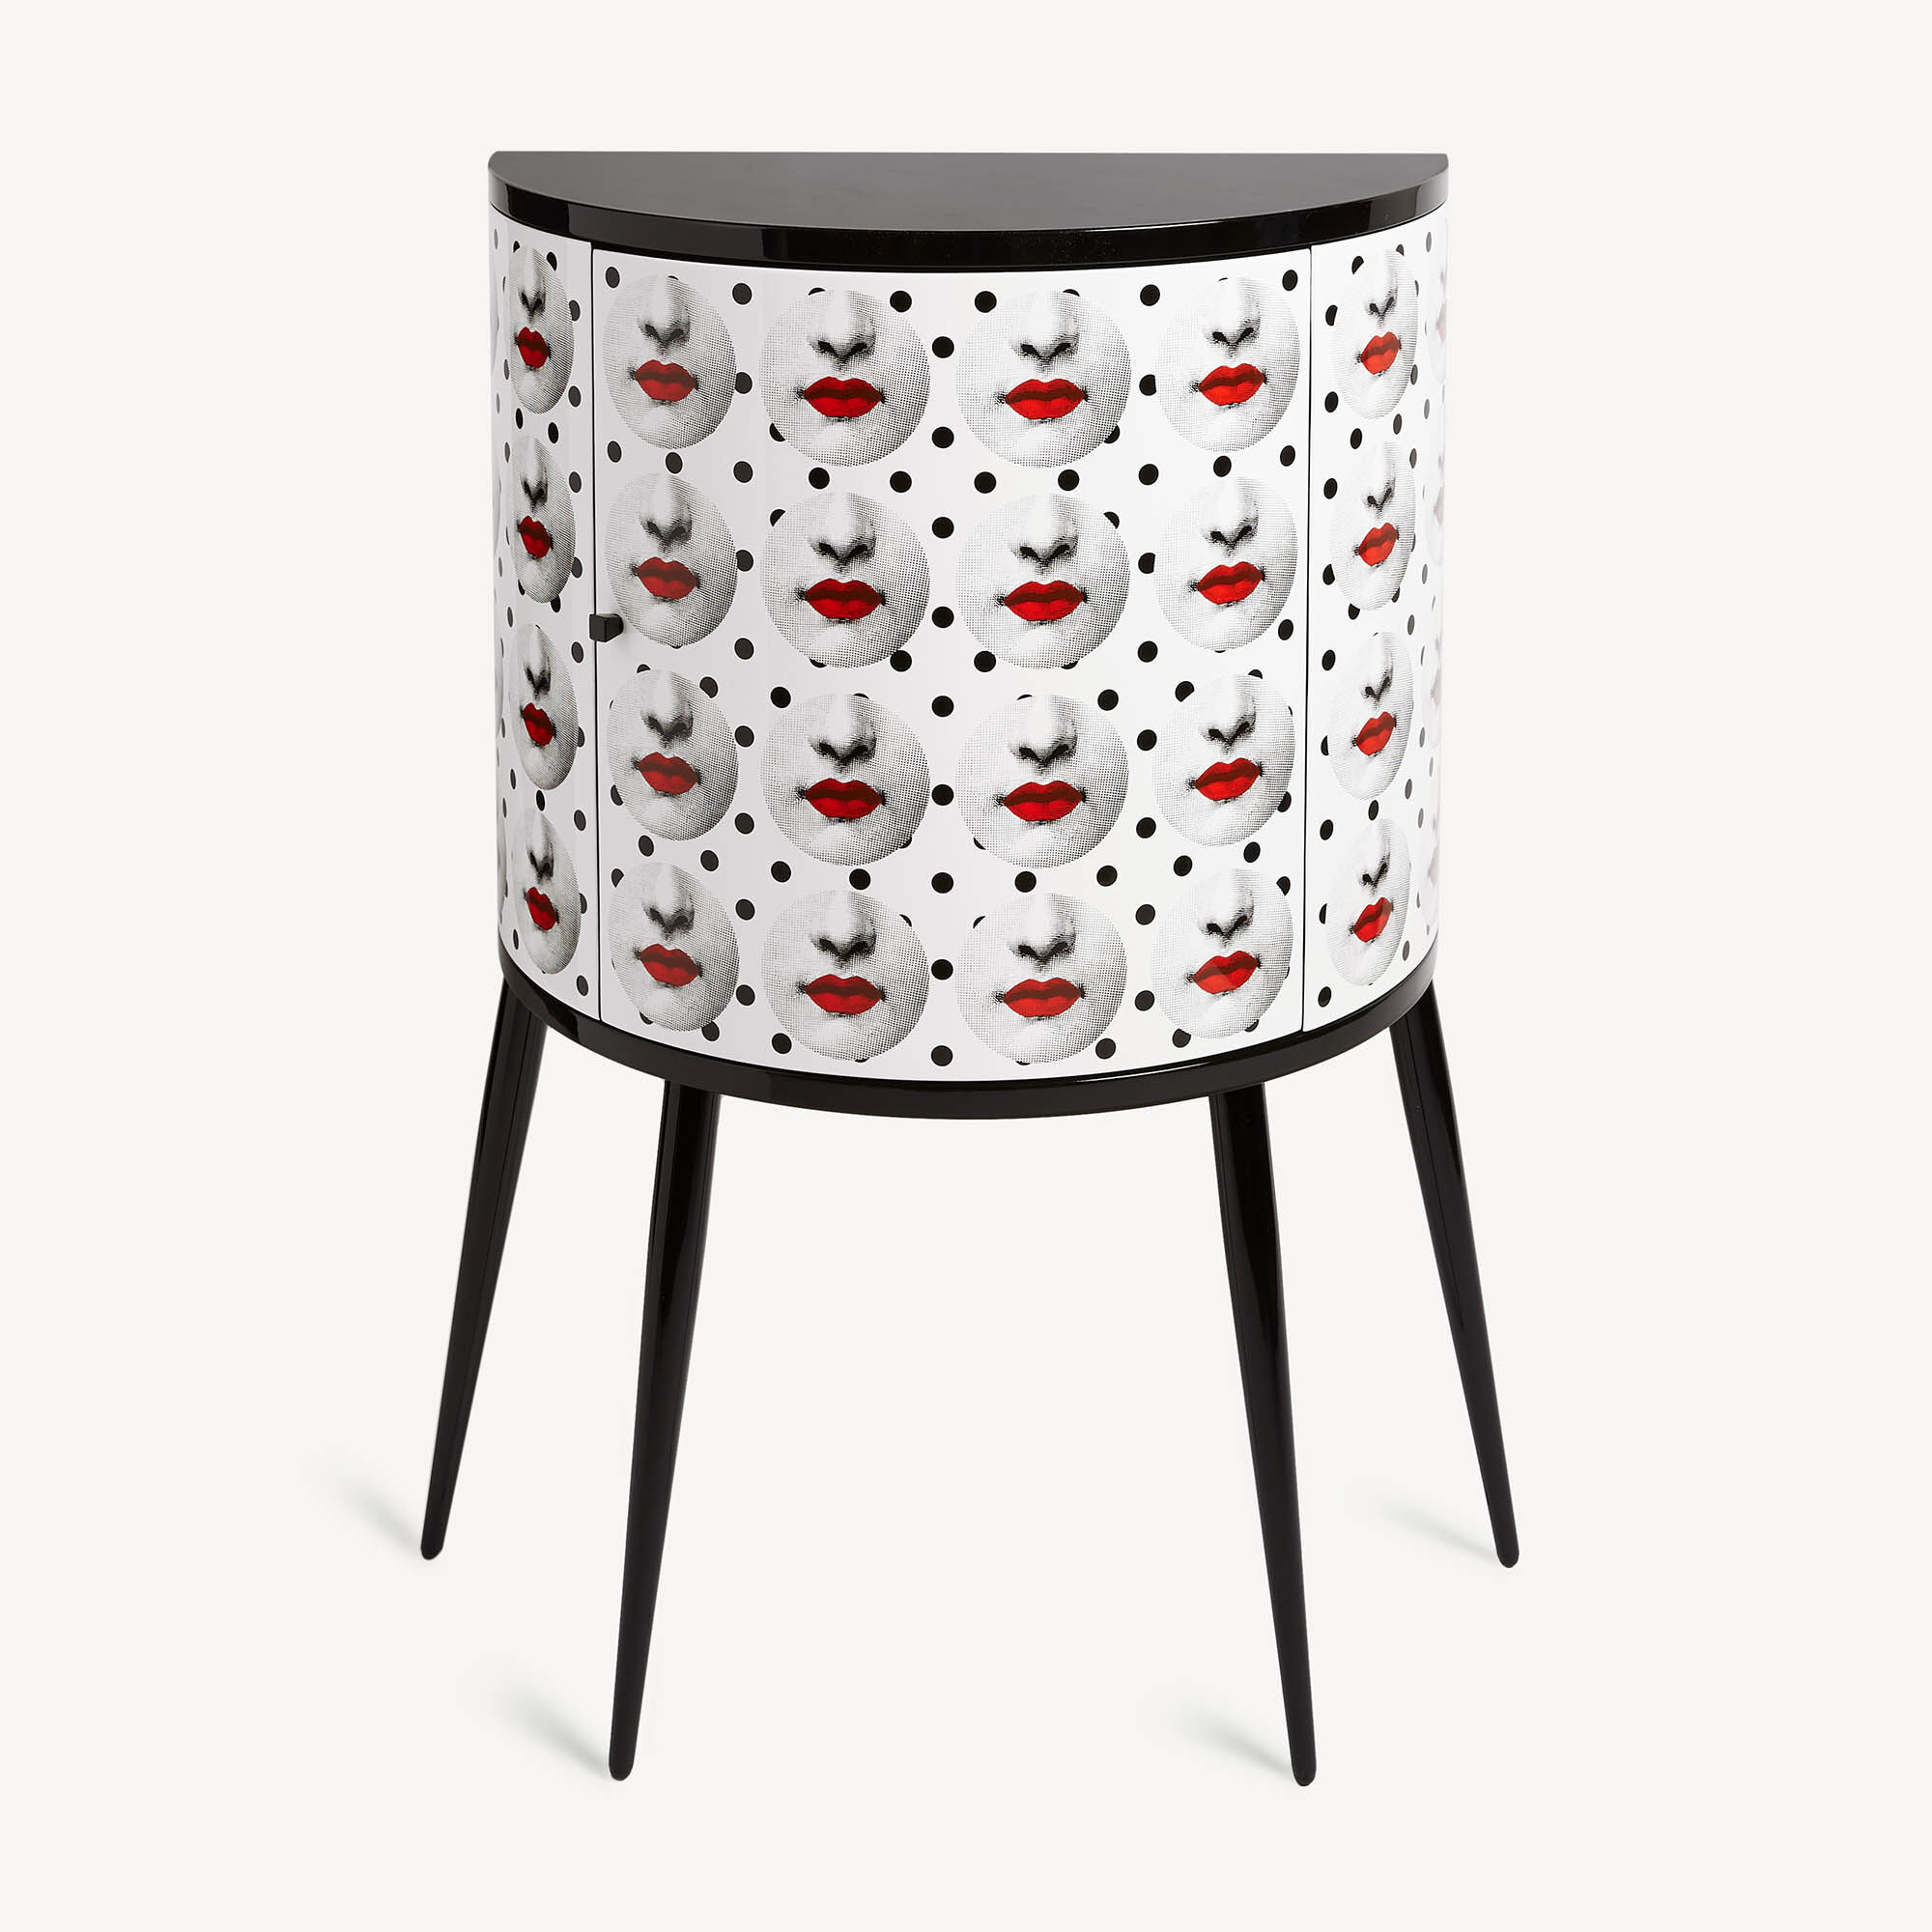 Exclusive Furniture for home and outdoors | Fornasetti®